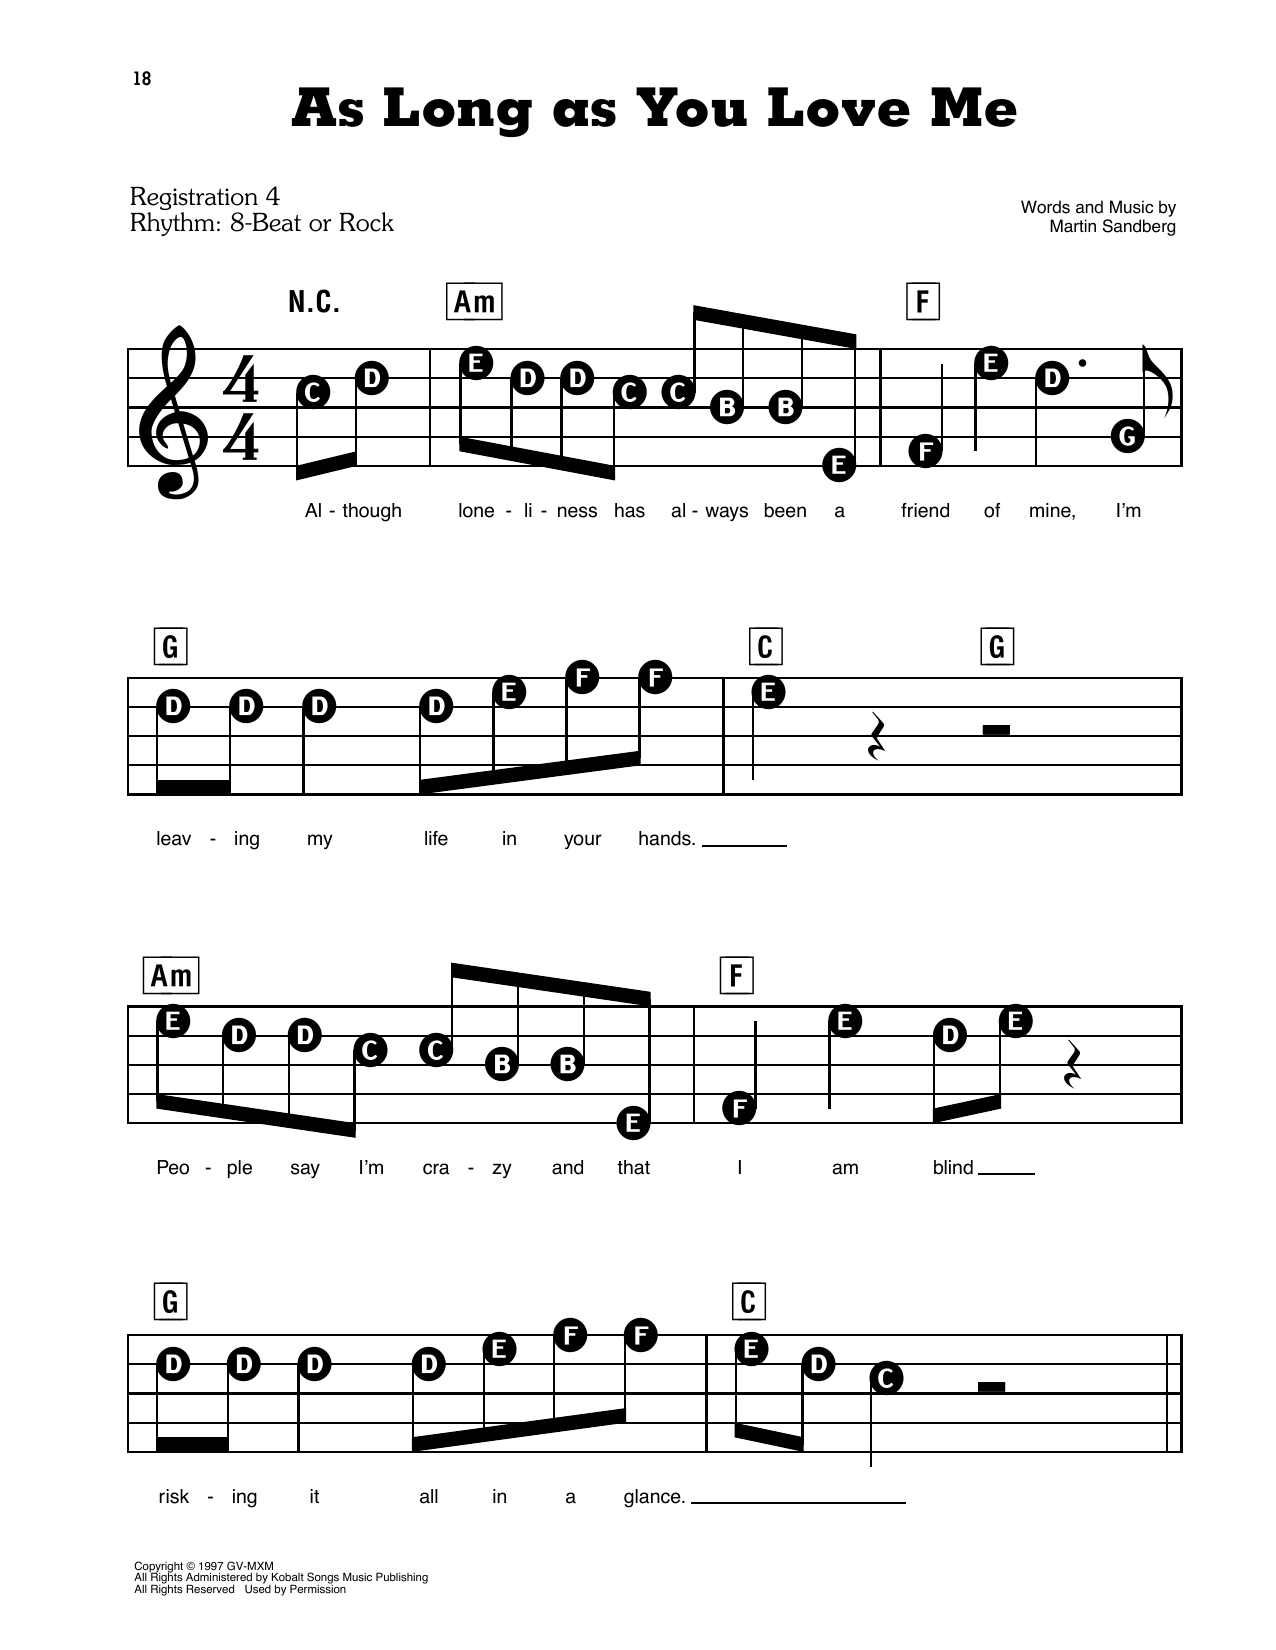 Backstreet Boys As Long As You Love Me sheet music notes and chords. Download Printable PDF.